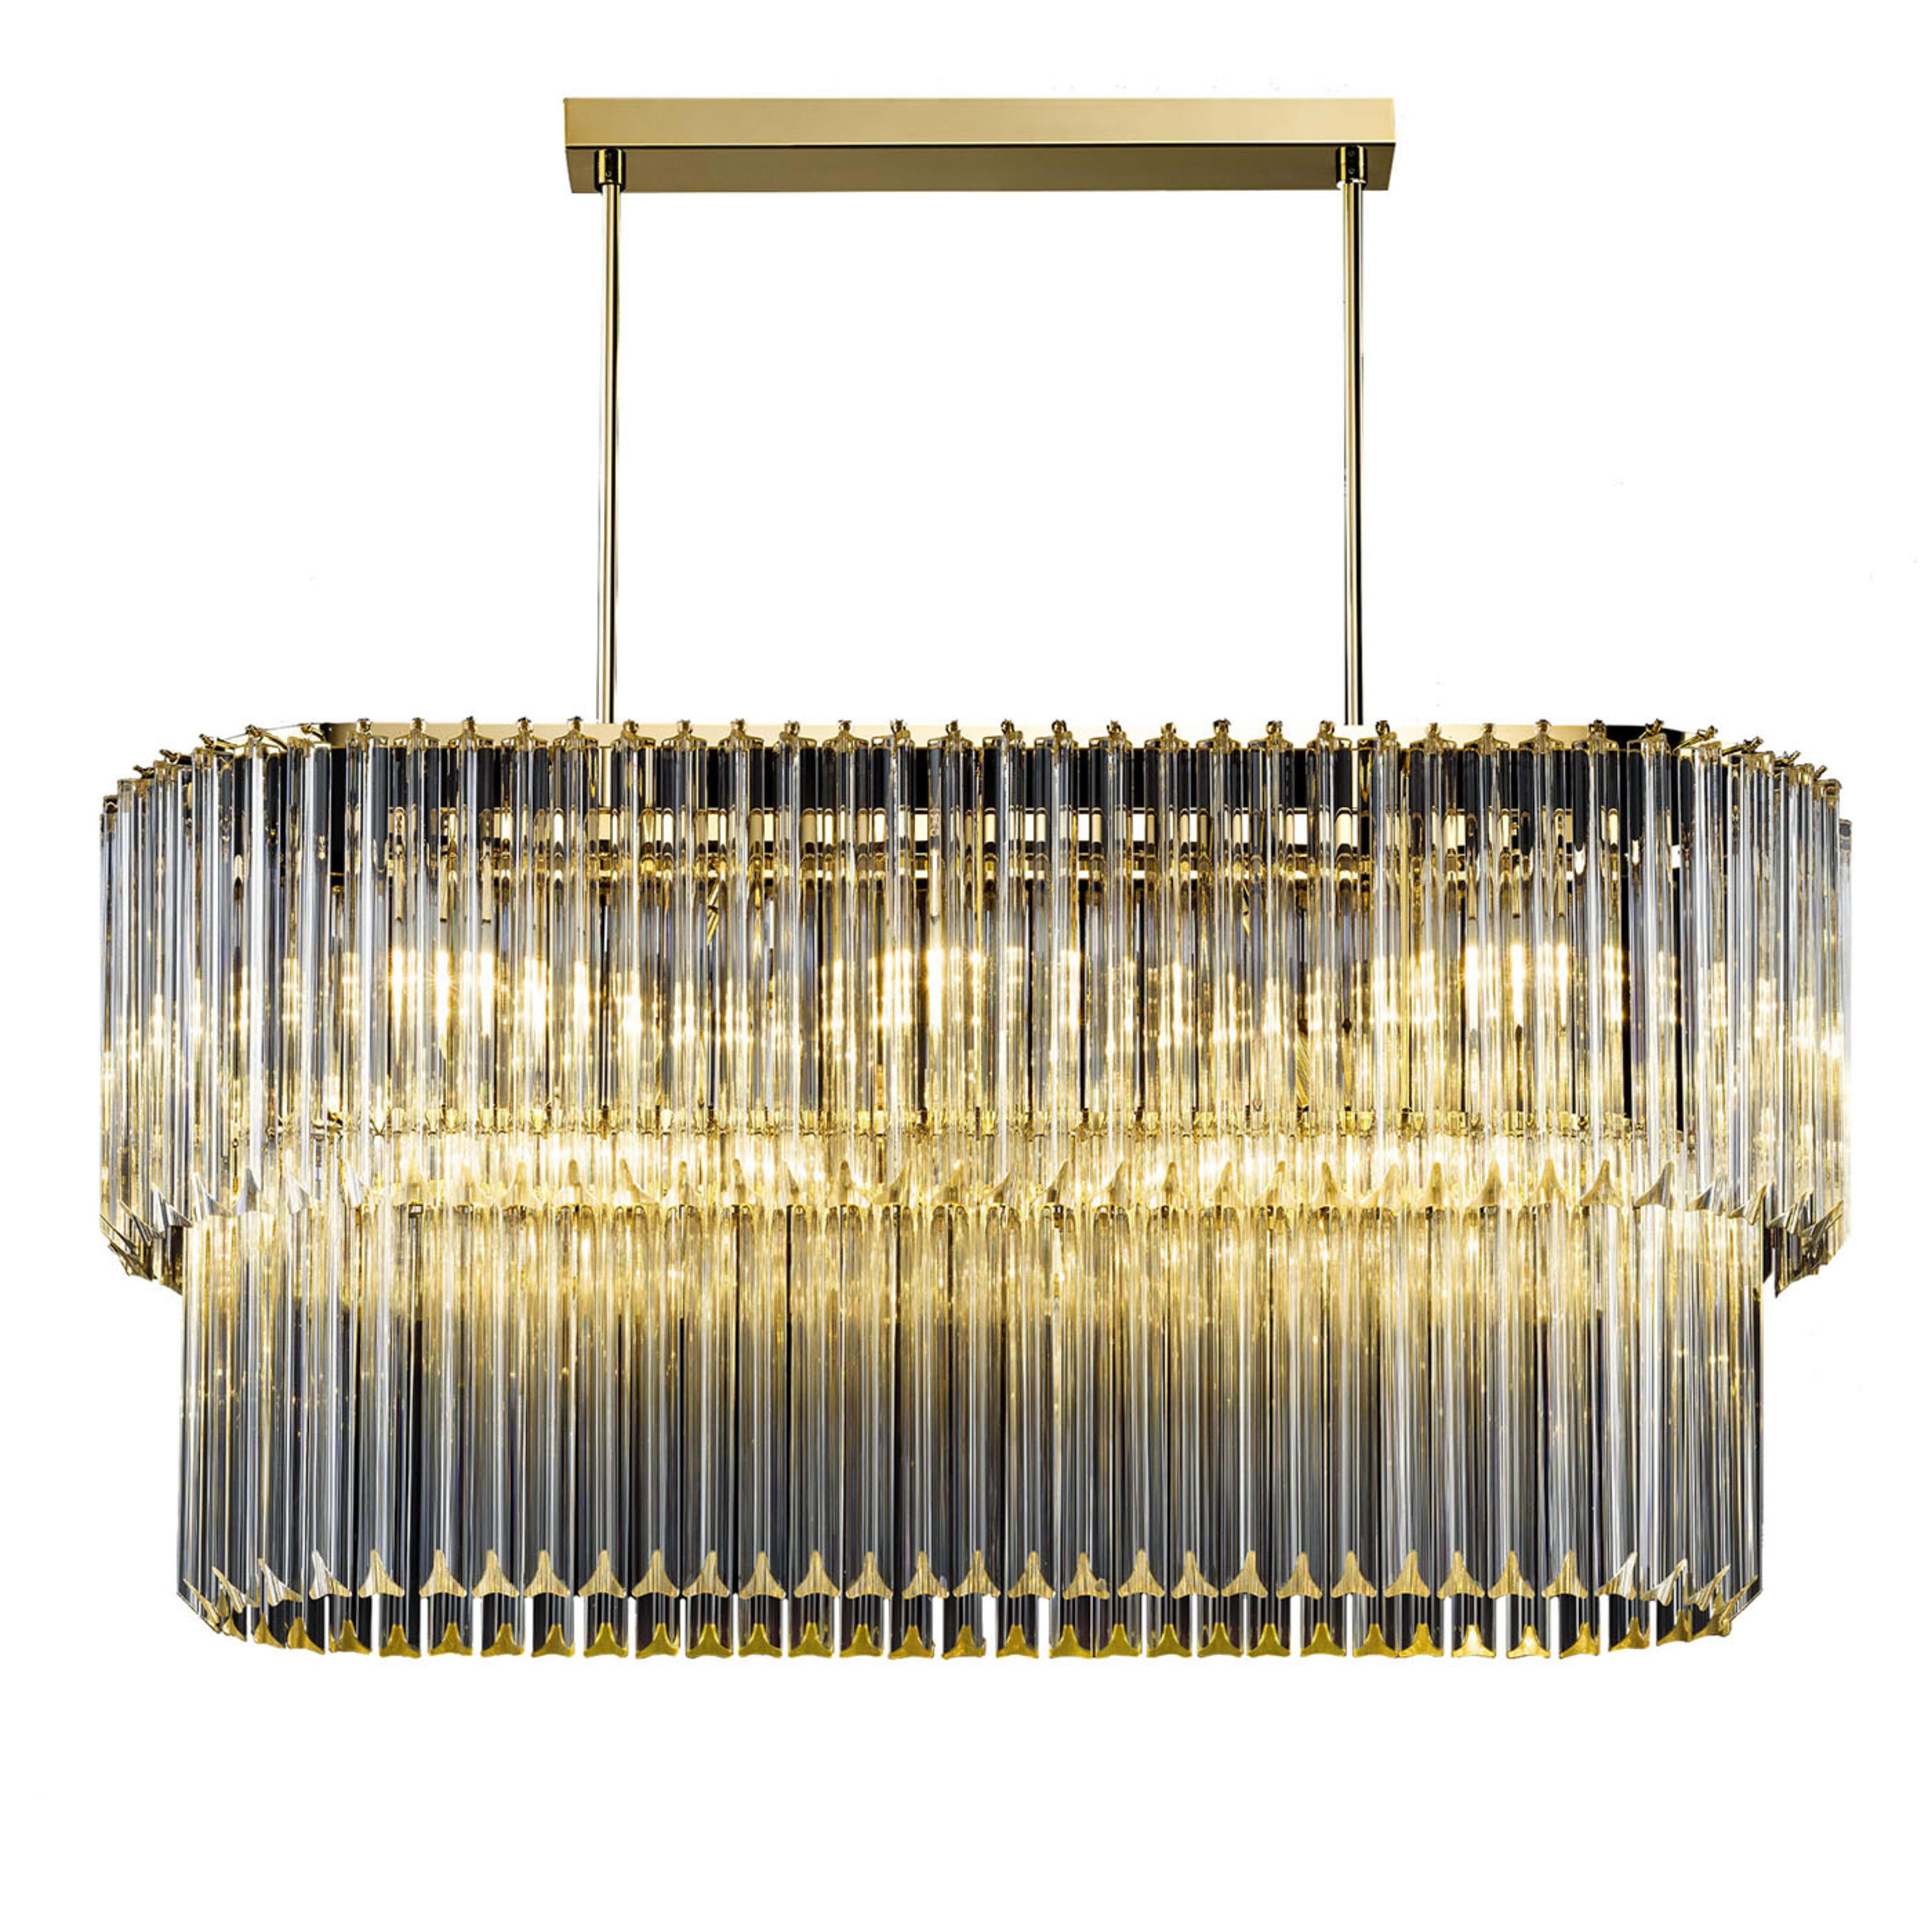 Bold and stately, this chandelier will illuminate a modern interior with utmost elegance. Clean and sophisticated with an oval profile, it features two layers of transparent glass trihedrons, mounted on a burnished metal structure. Emitting a warm